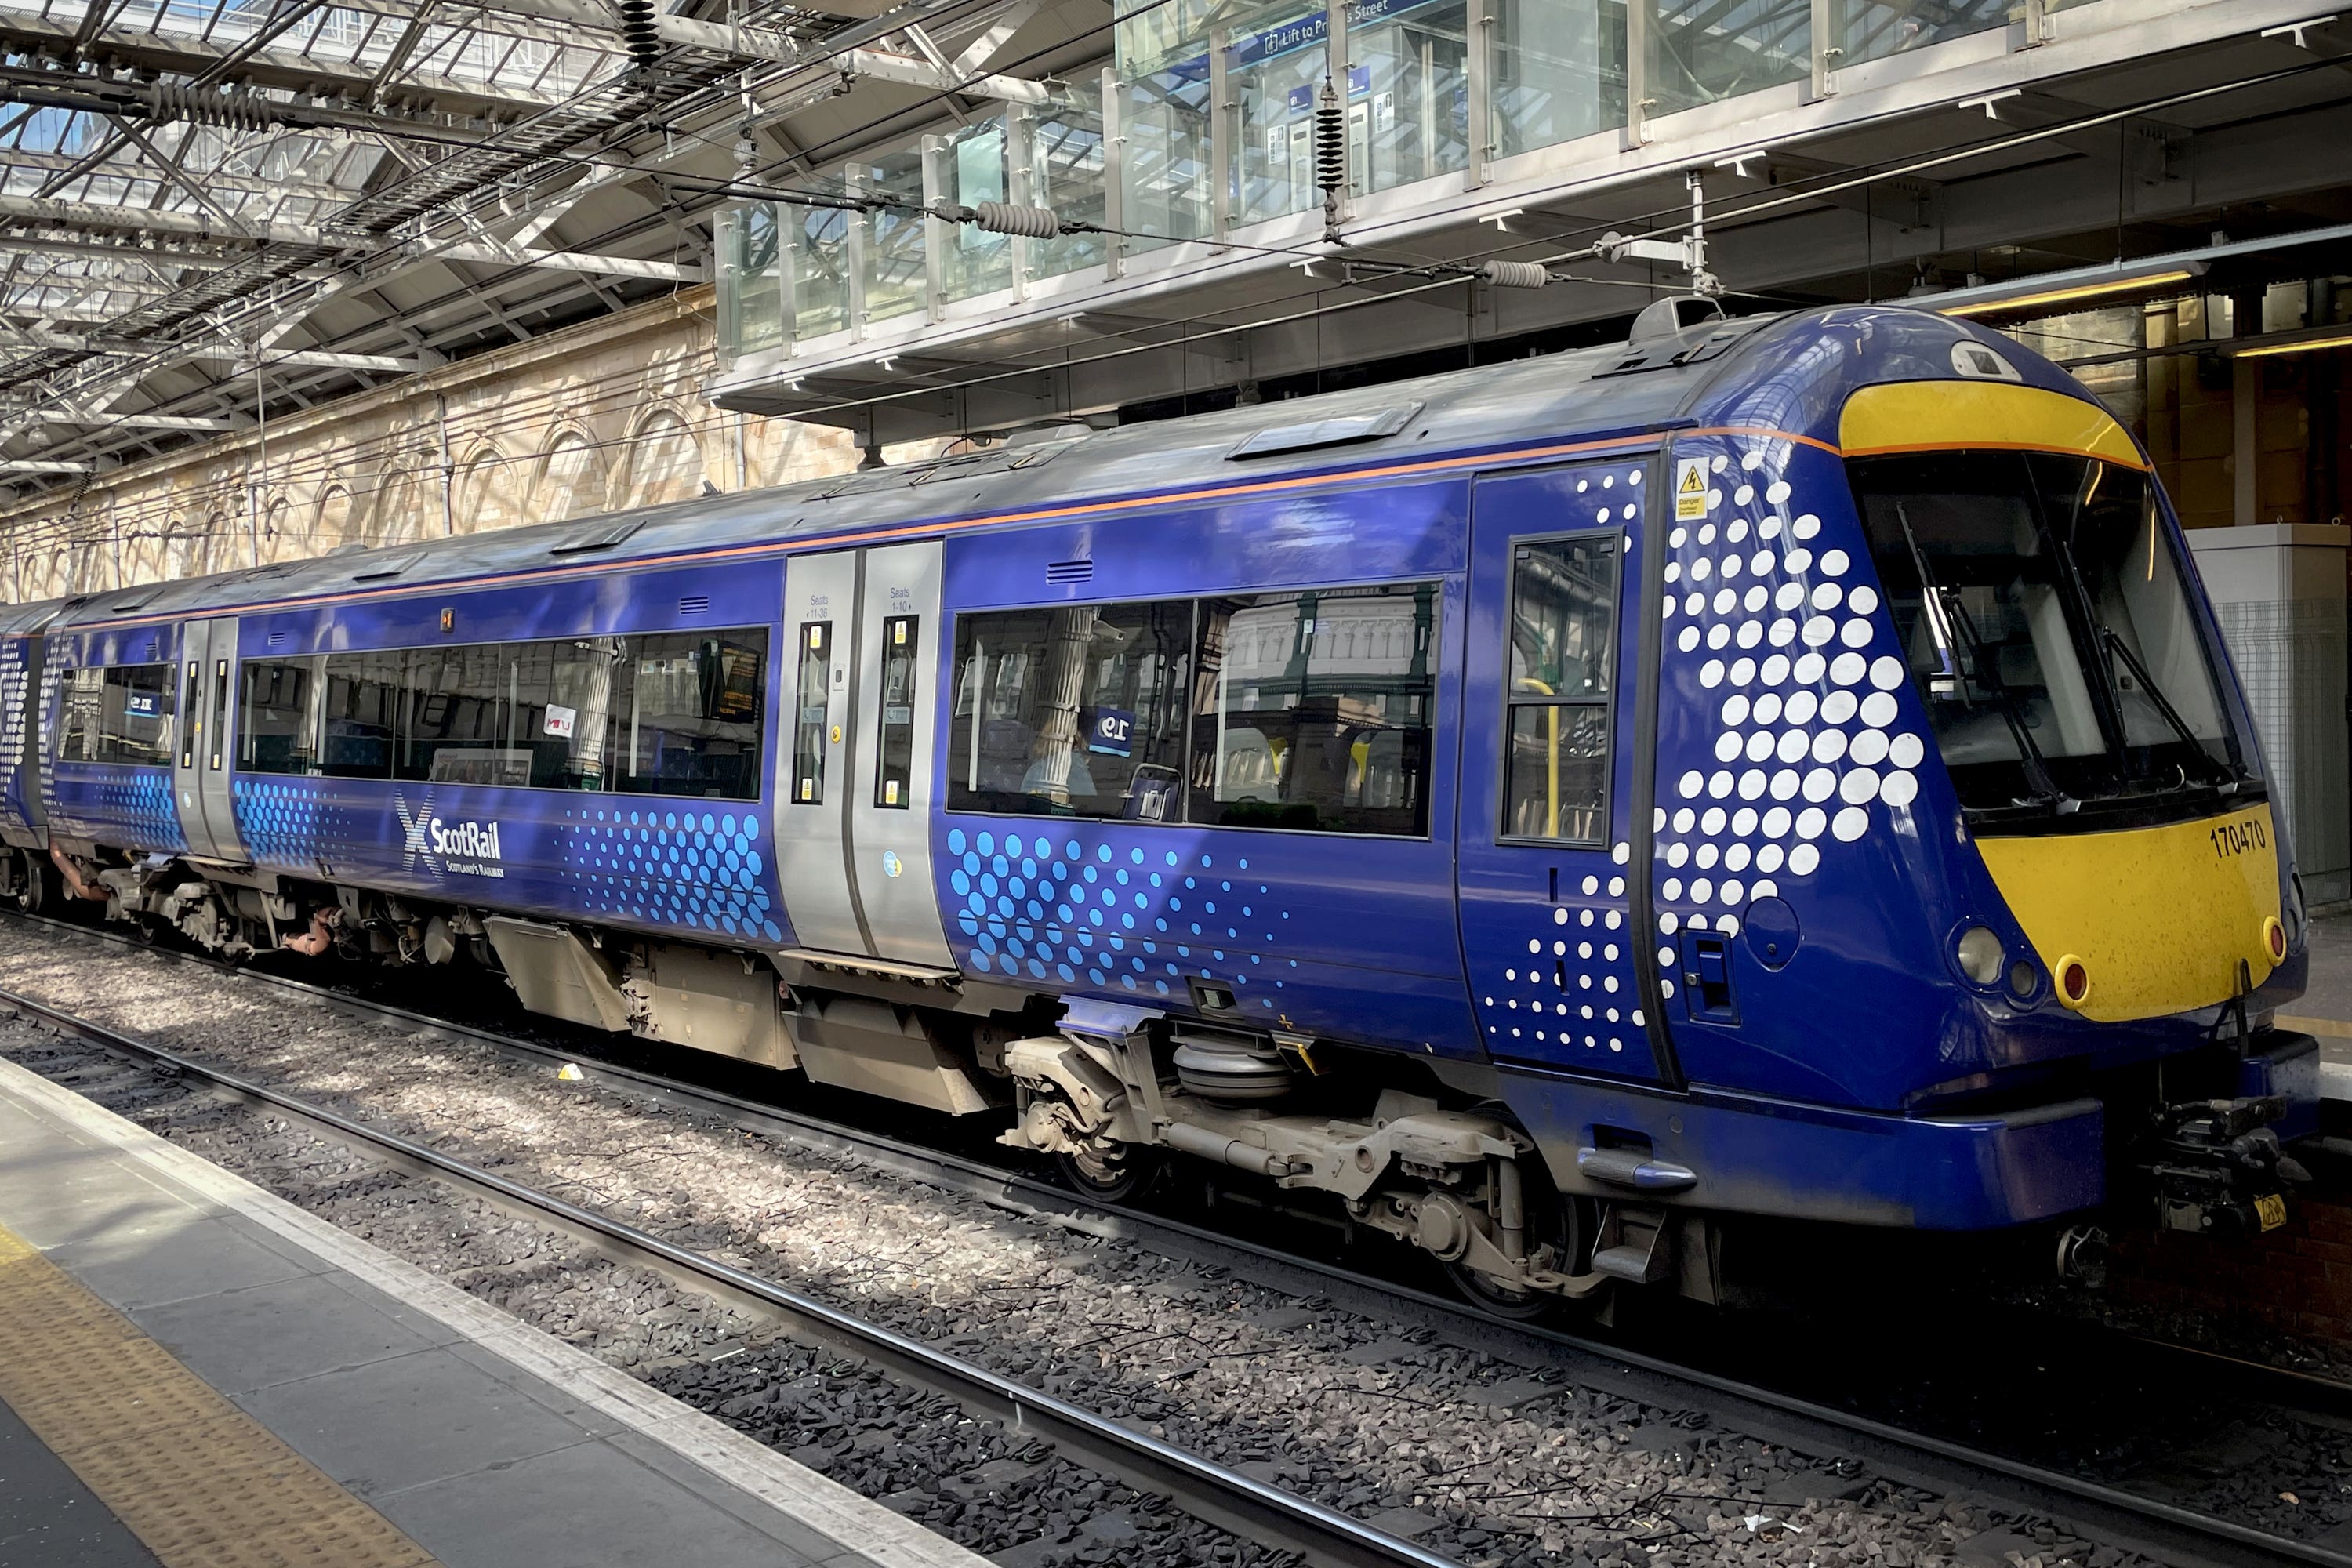 It is two years since ScotRail came into national ownership.